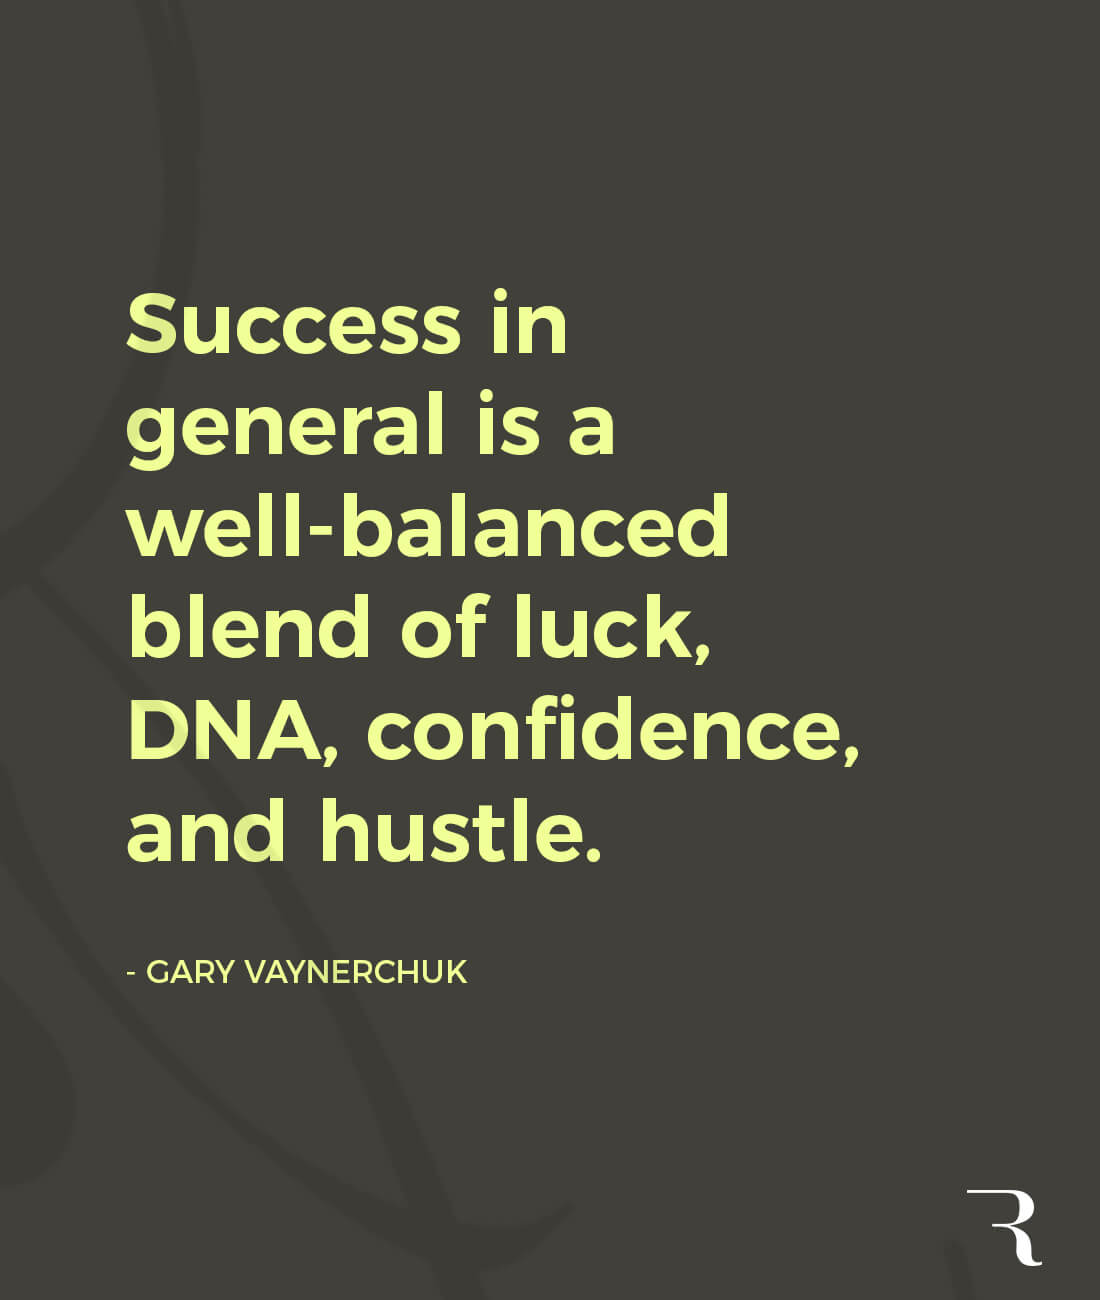 Motivational Quotes: “Success is a blend of luck, DNA, confidence, and hustle.” 112 Motivational Quotes to Be a Better Entrepreneur